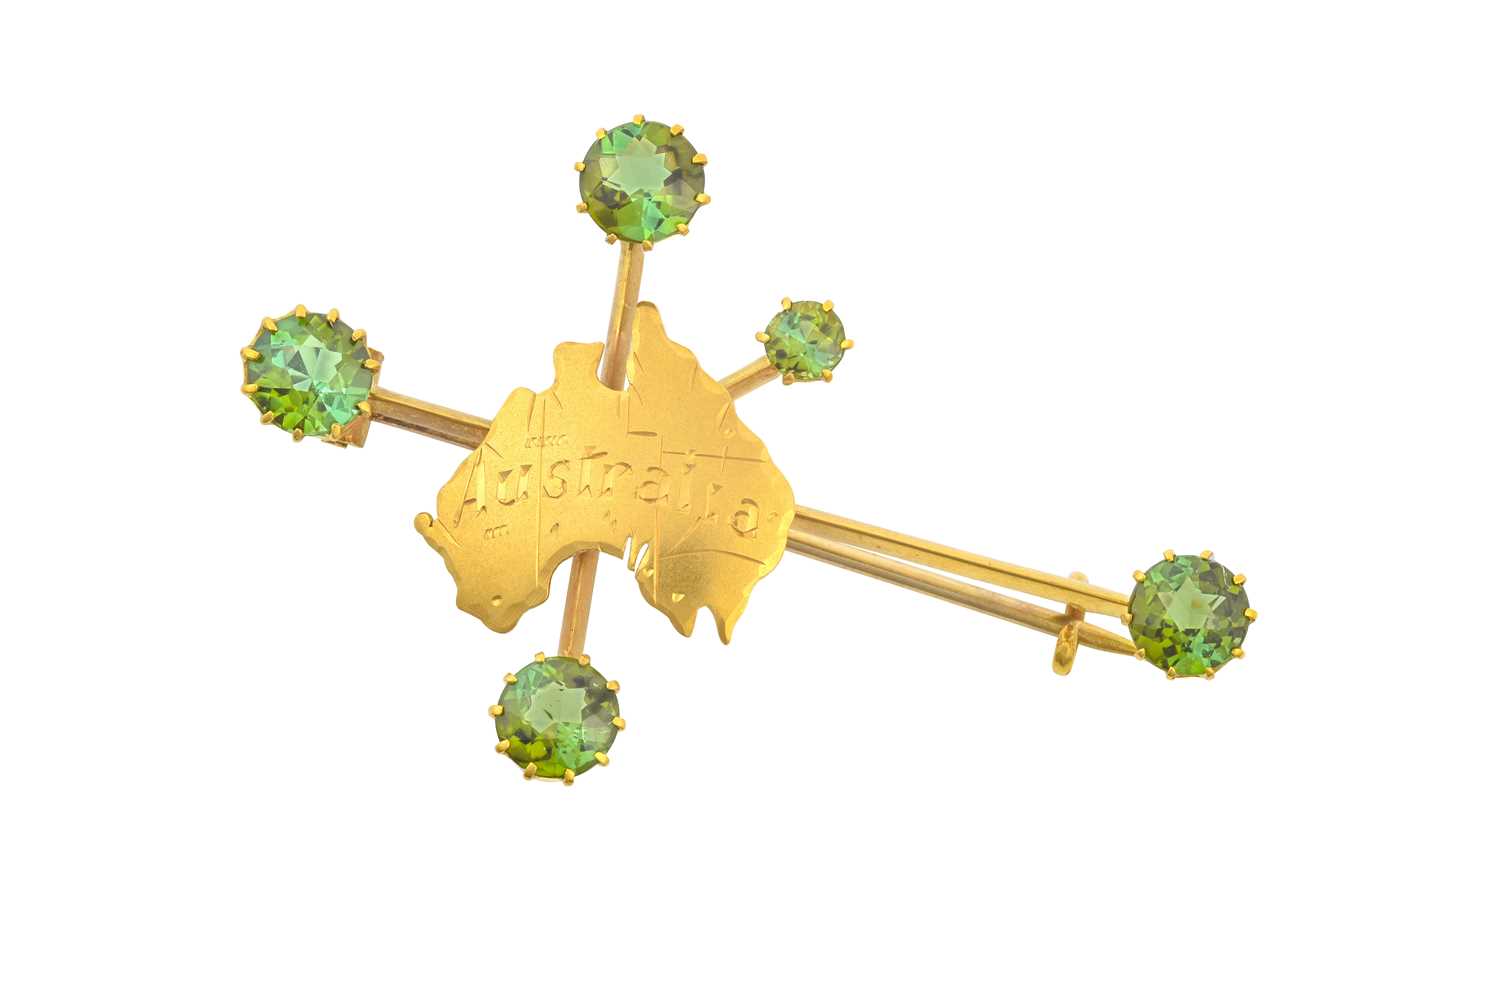 A Green Tourmaline Brooch a yellow knife edge bar overlaid with a plaque depicting Australia, with